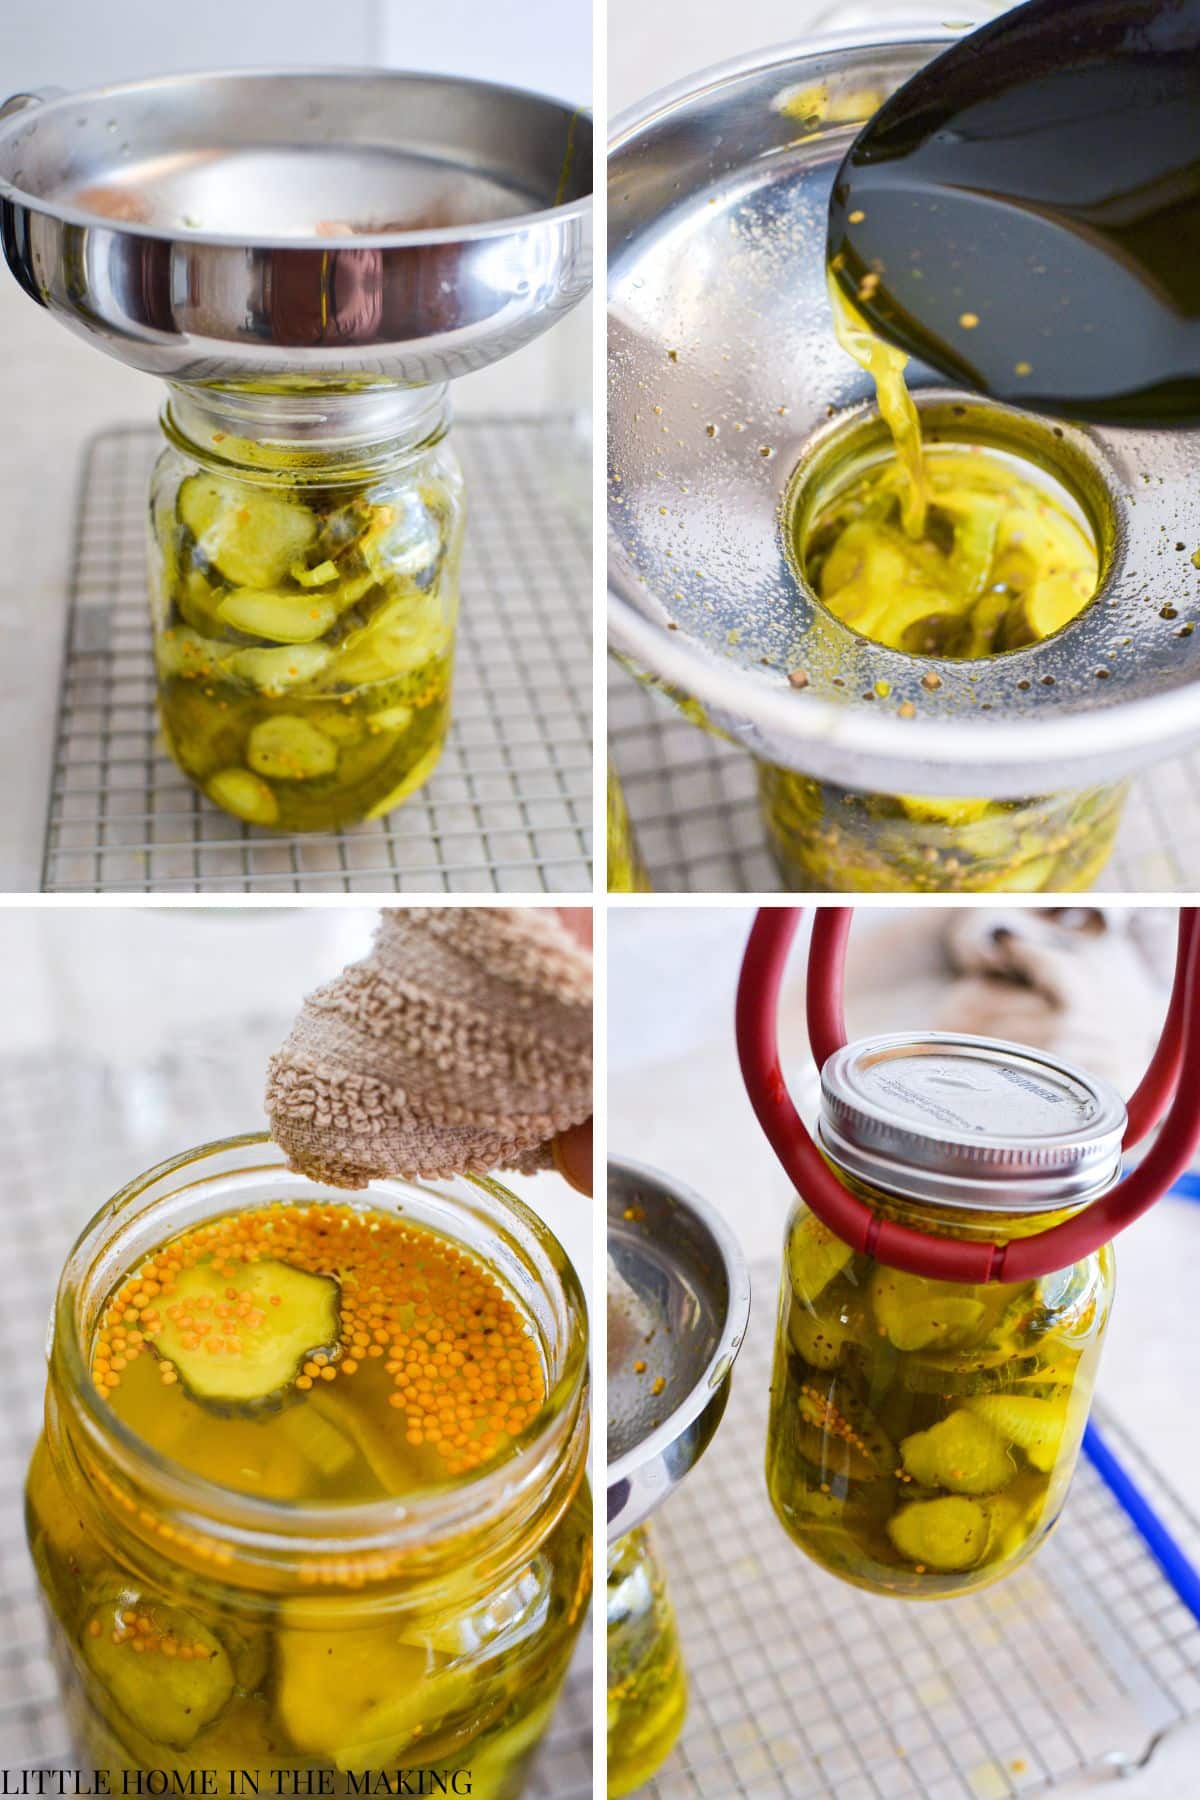 Adding pickles to a jar, then adding a lid and transferring.